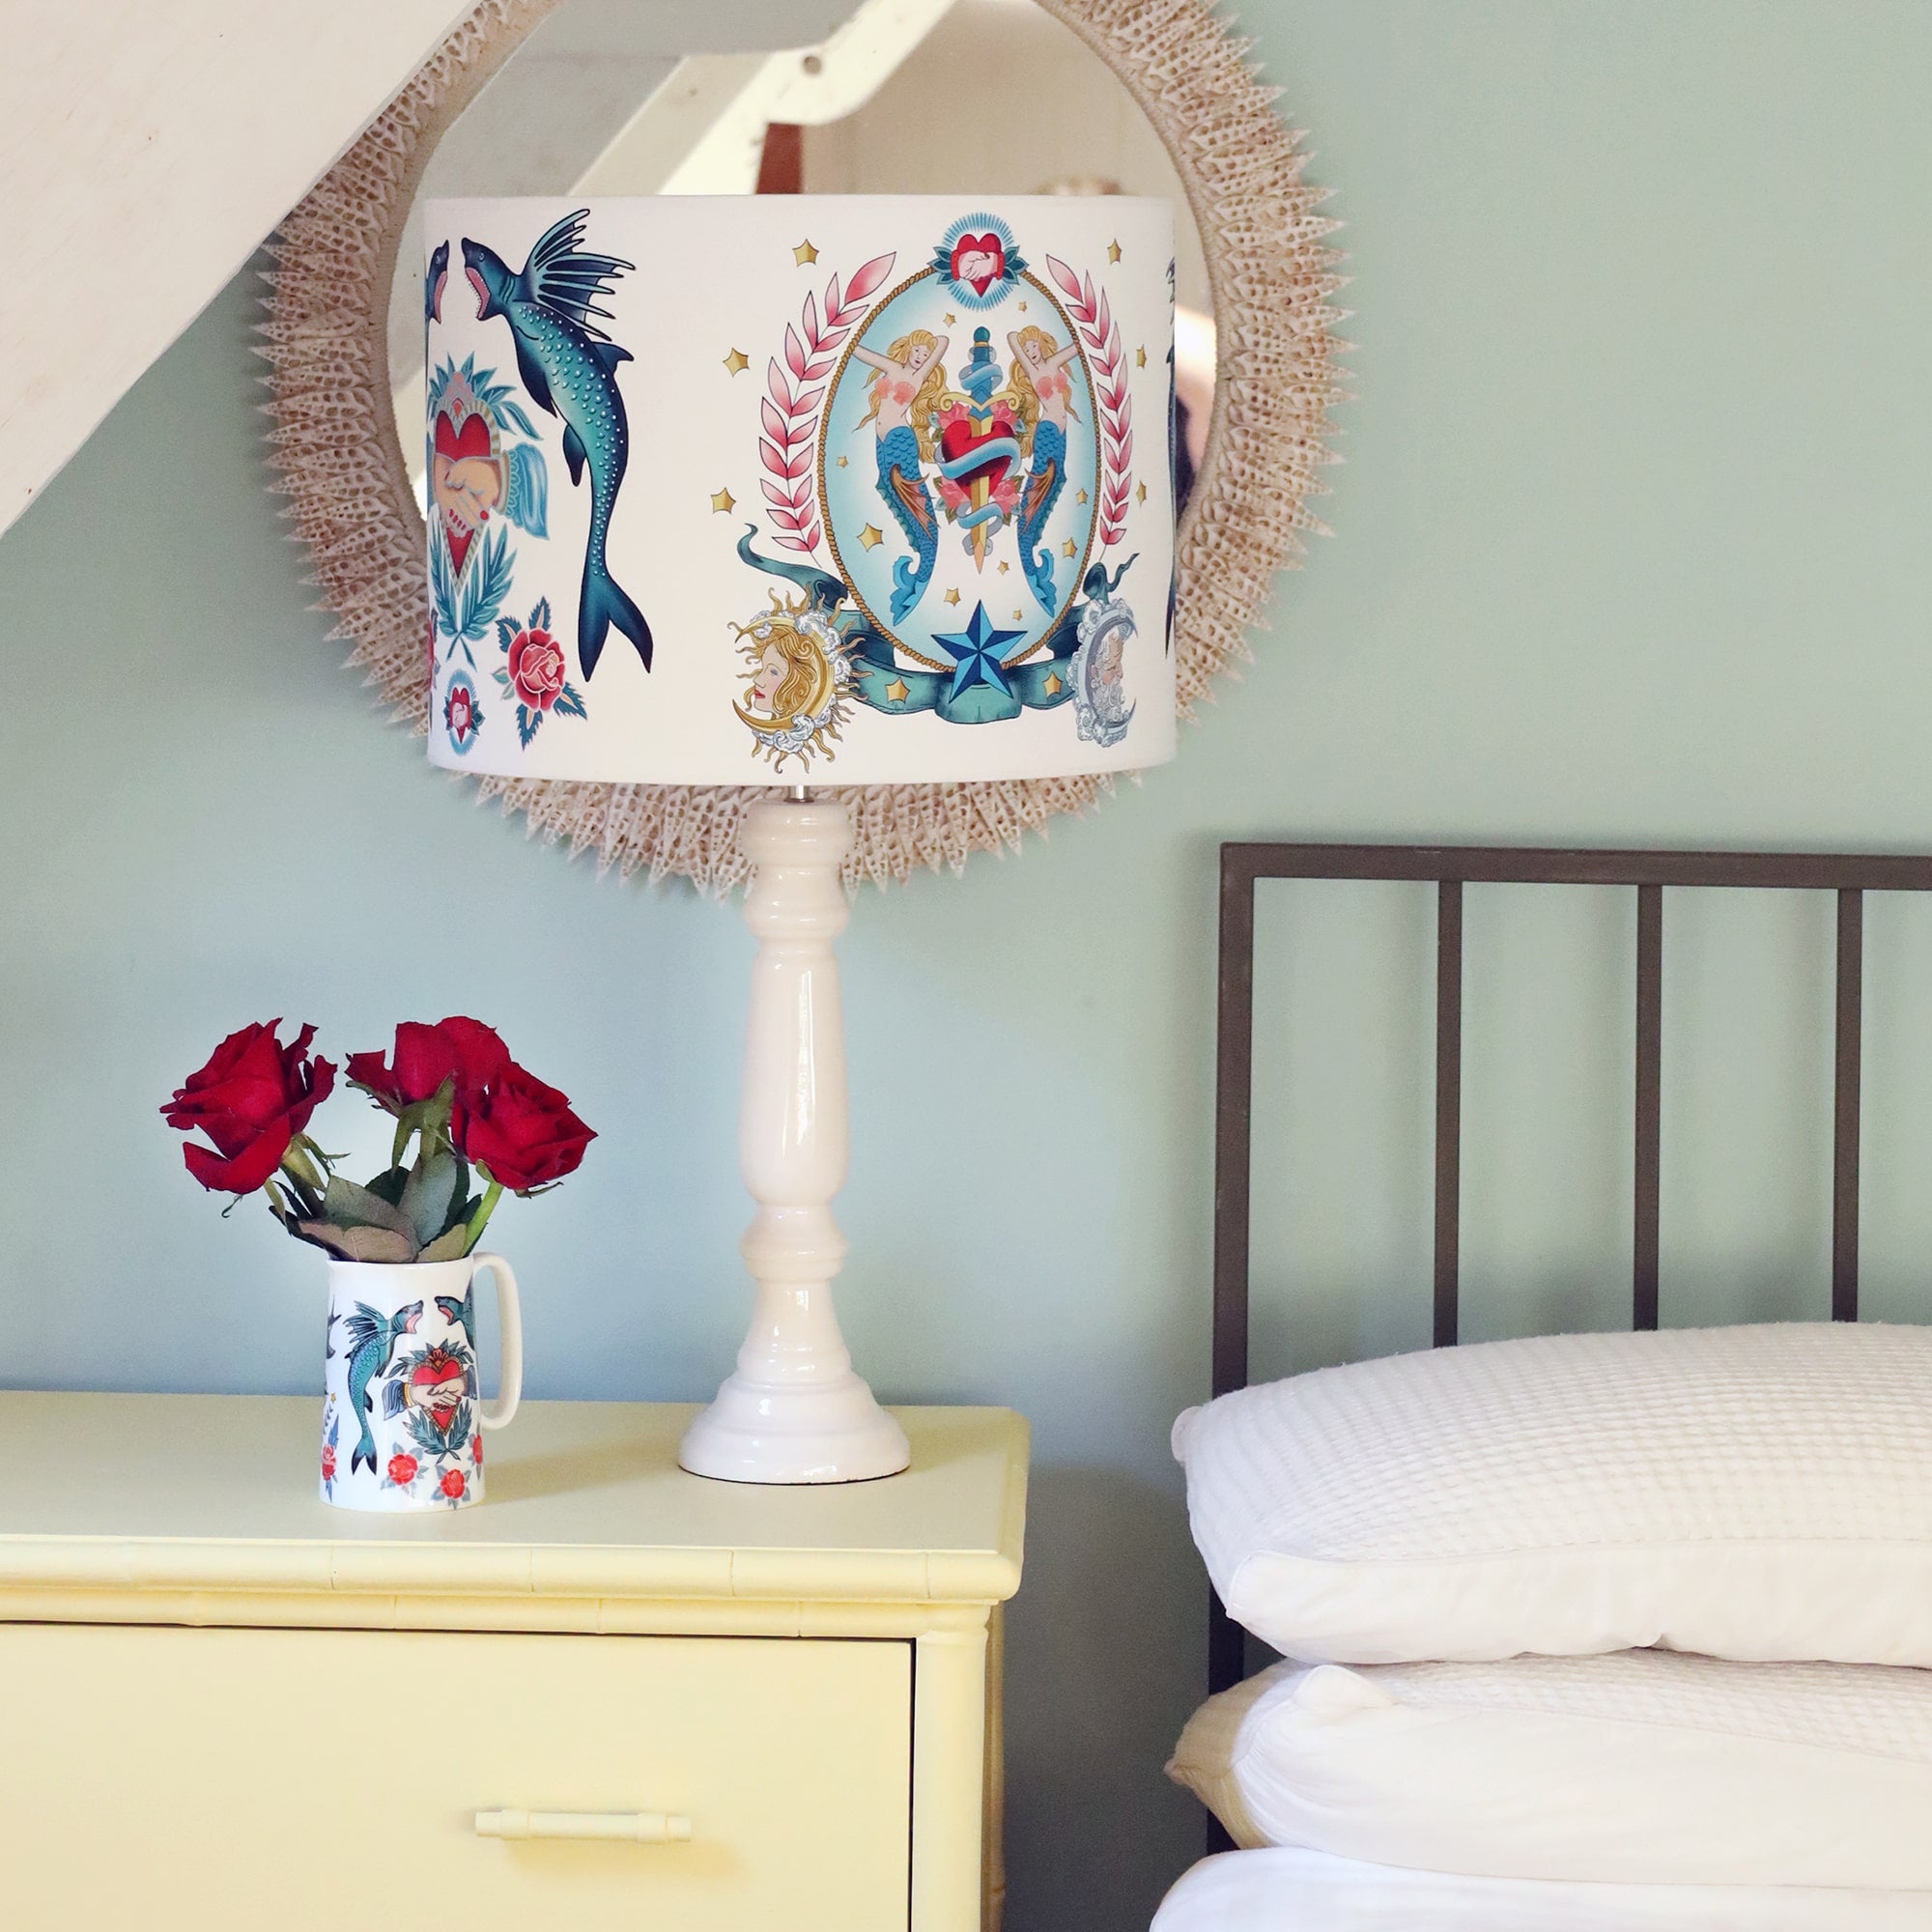 Soft yellow chest of drawers next to a bed with a glossy white lamp base and mermaids & daggers and sharks & heartstattoo inspired design. There is a small jug with swallows and anchor design with red roses next to the lamp.